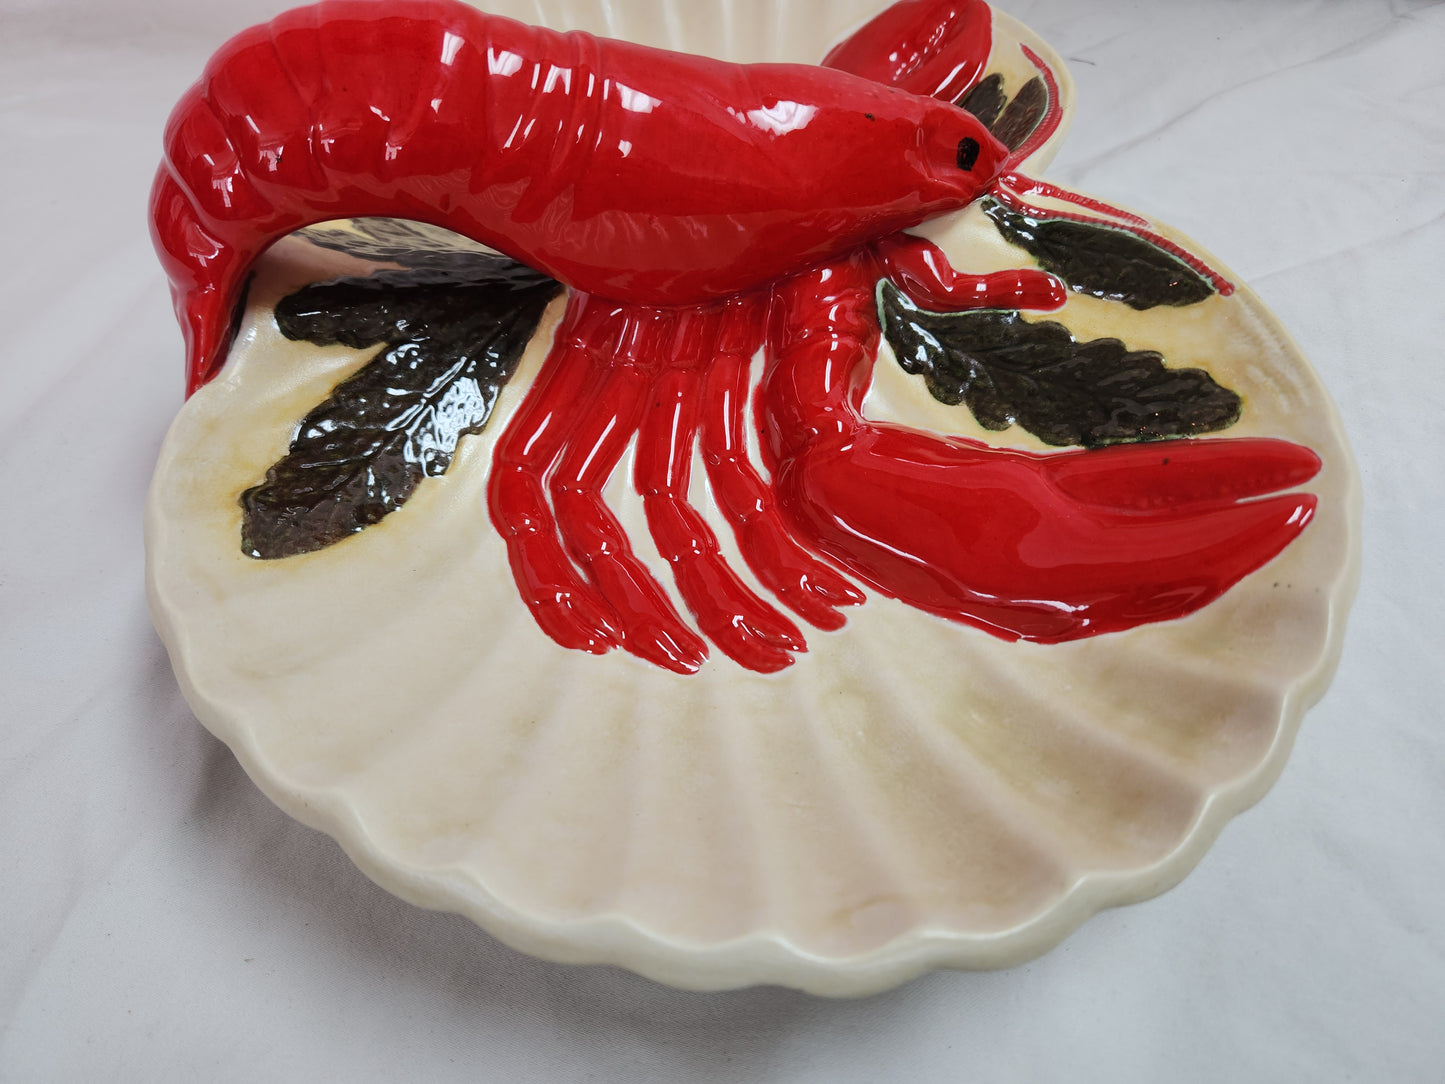 Mid-20th Century Ceramic Divided Lobster Serving Tray by Holland Mold